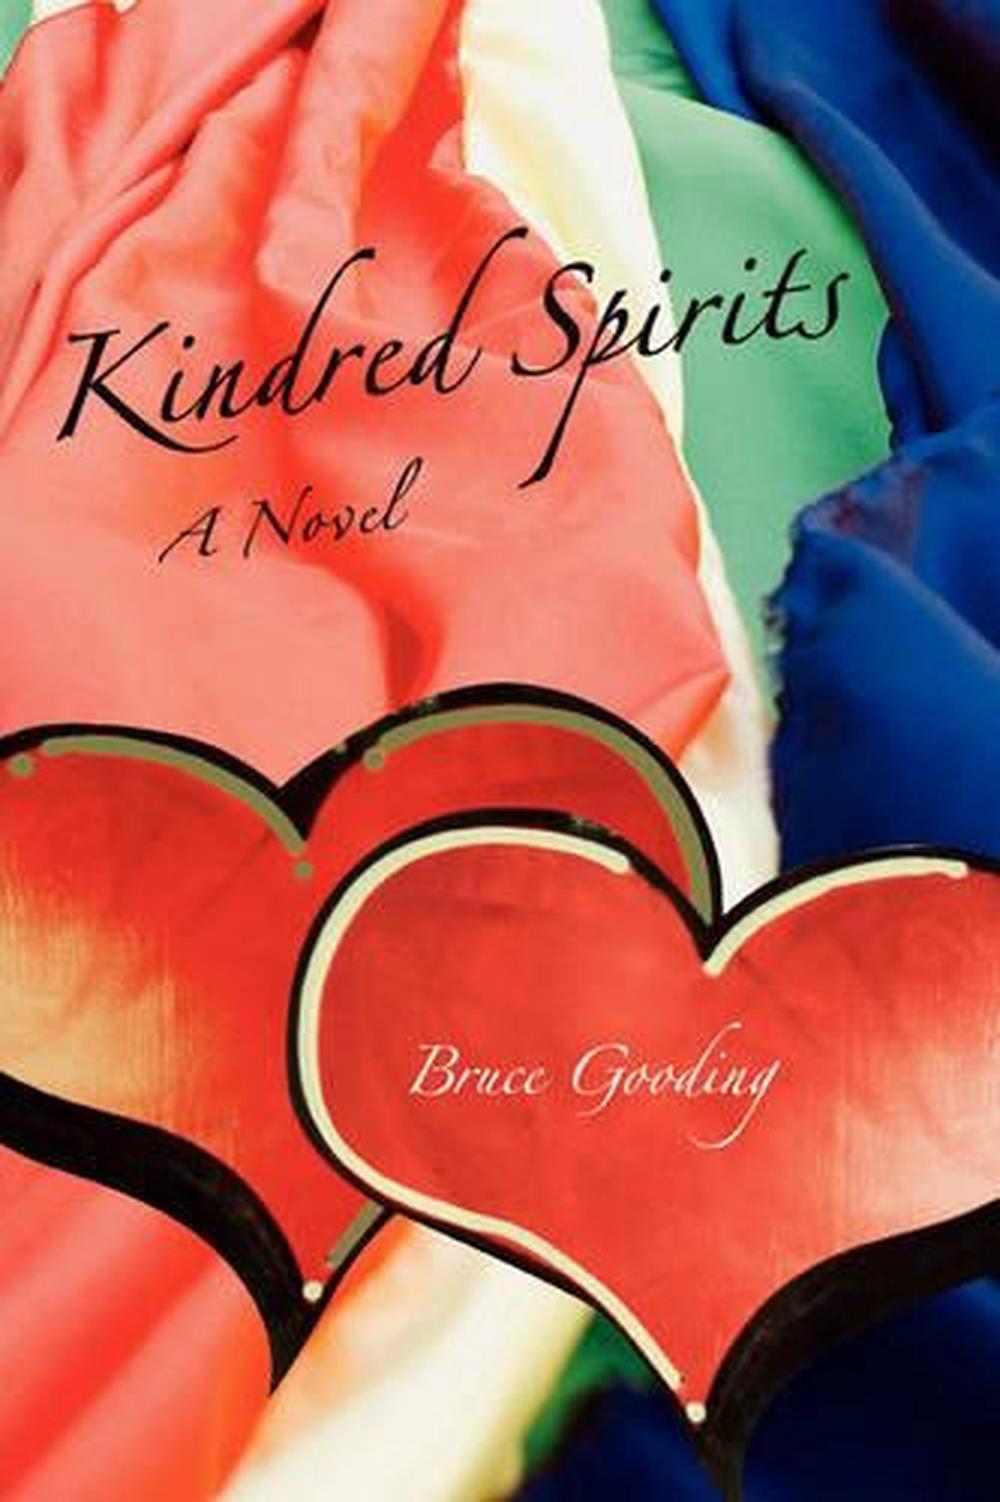 kindred spirits by rainbow rowell